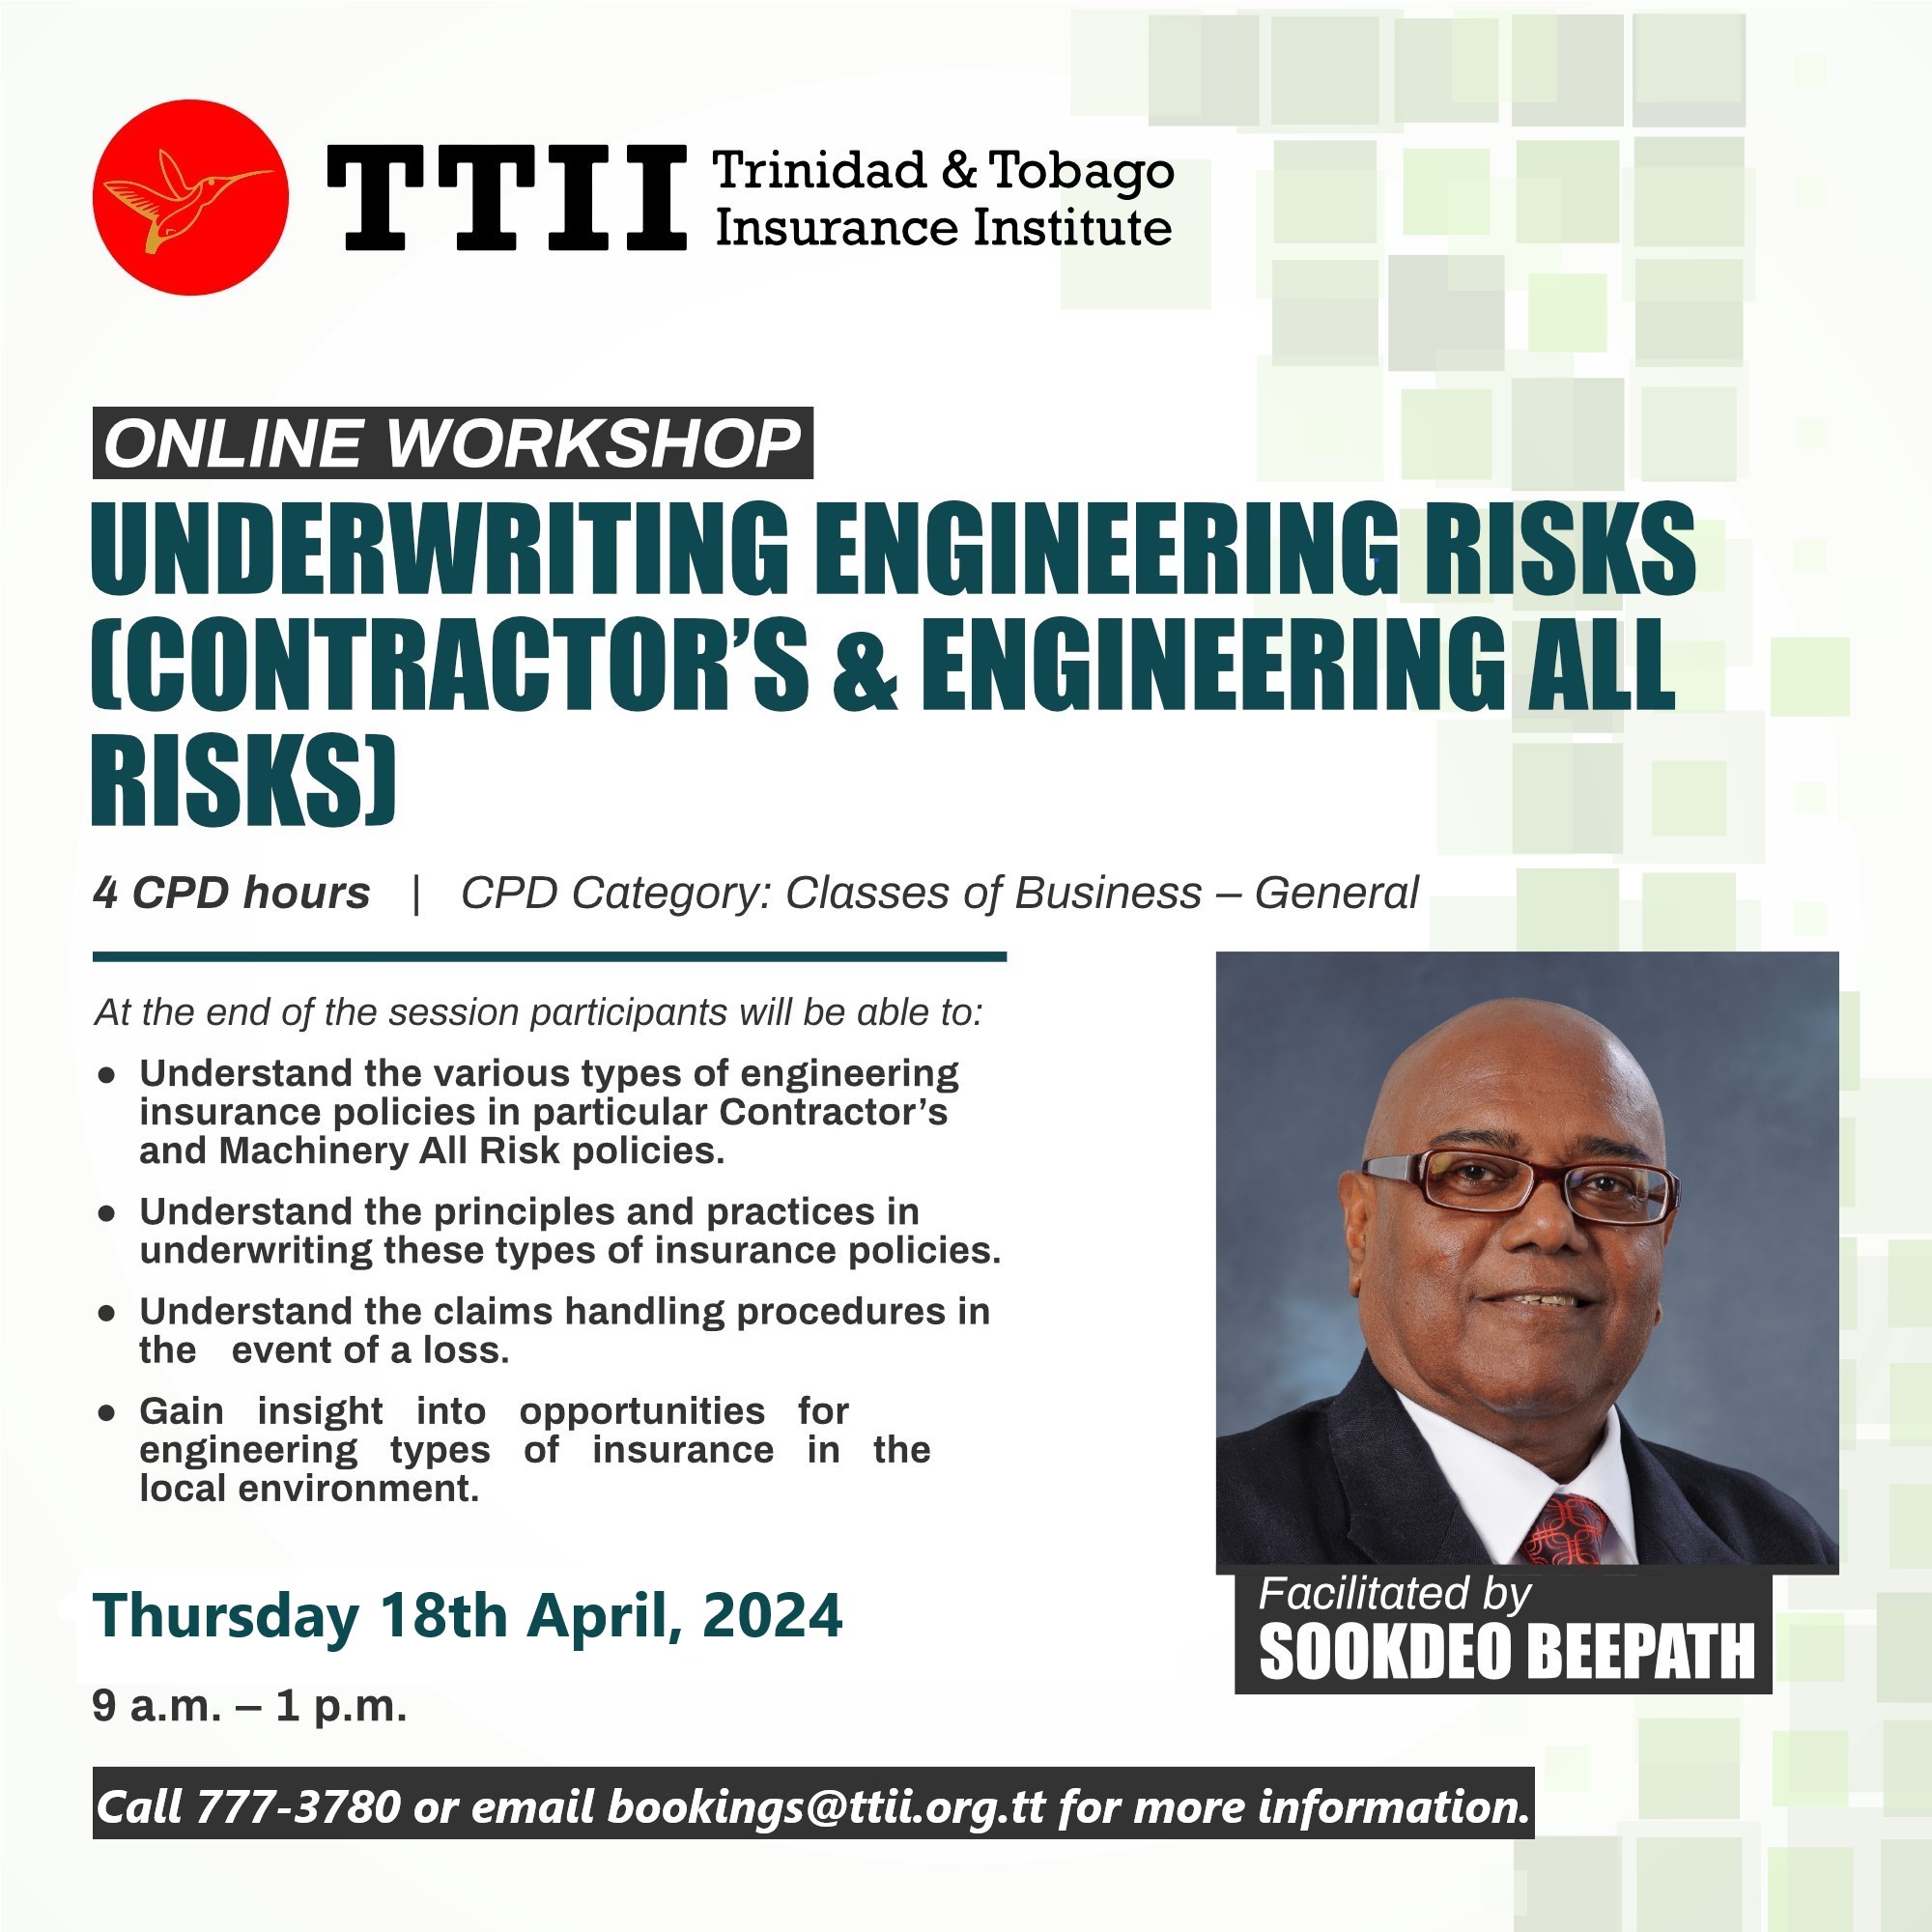 Underwriting Engineering Risks (Contractor’s & Engineering All Risks)